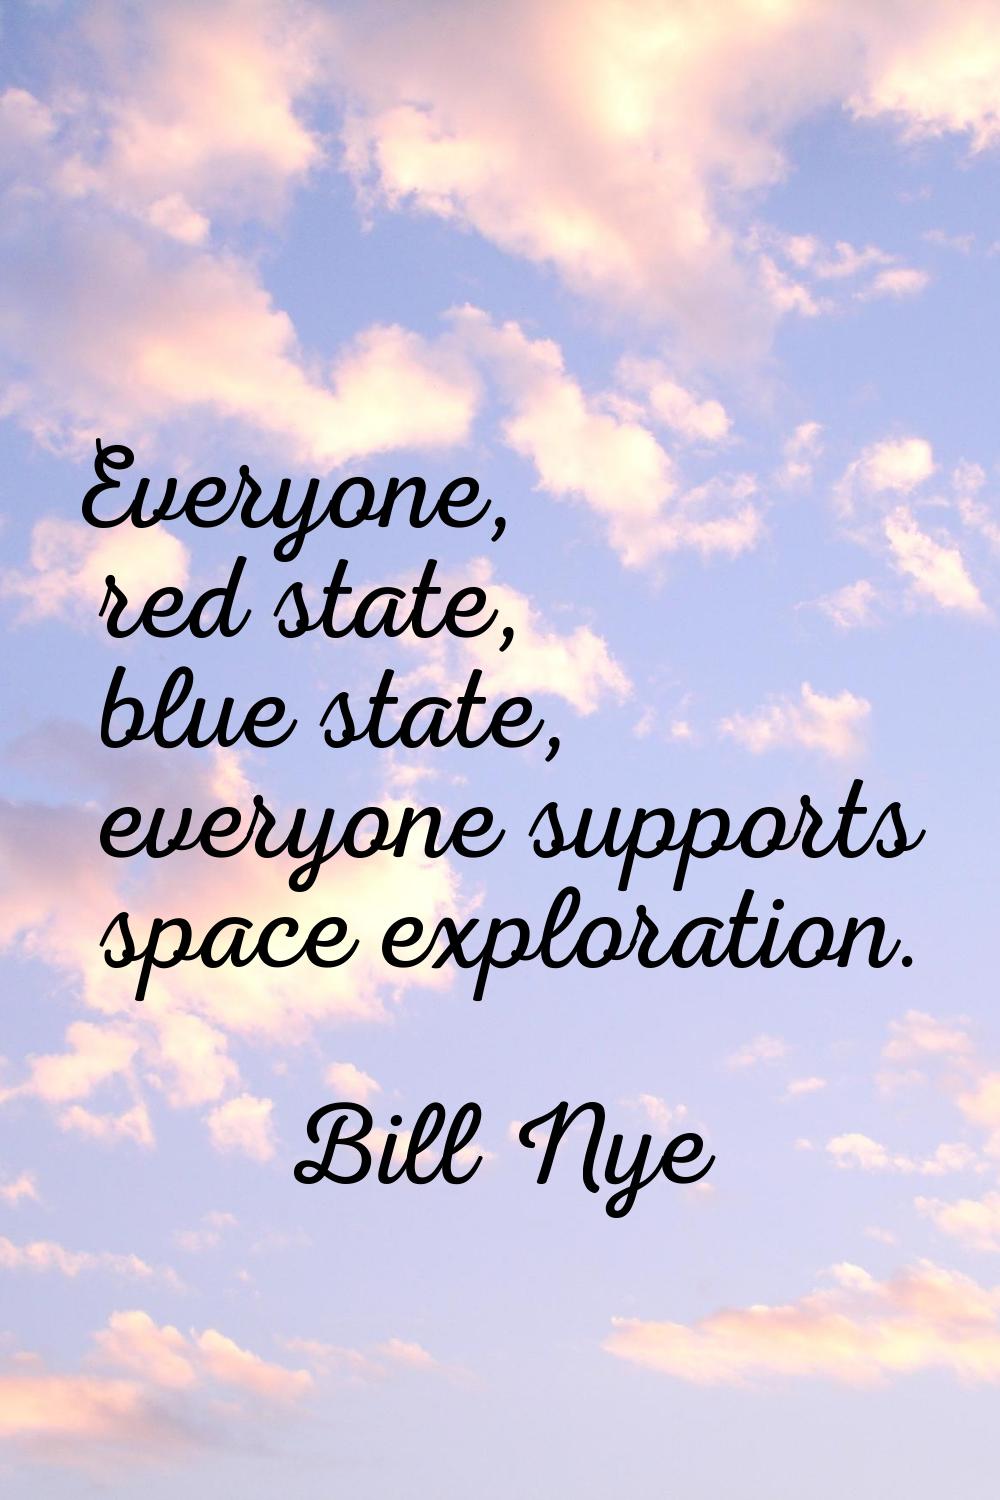 Everyone, red state, blue state, everyone supports space exploration.